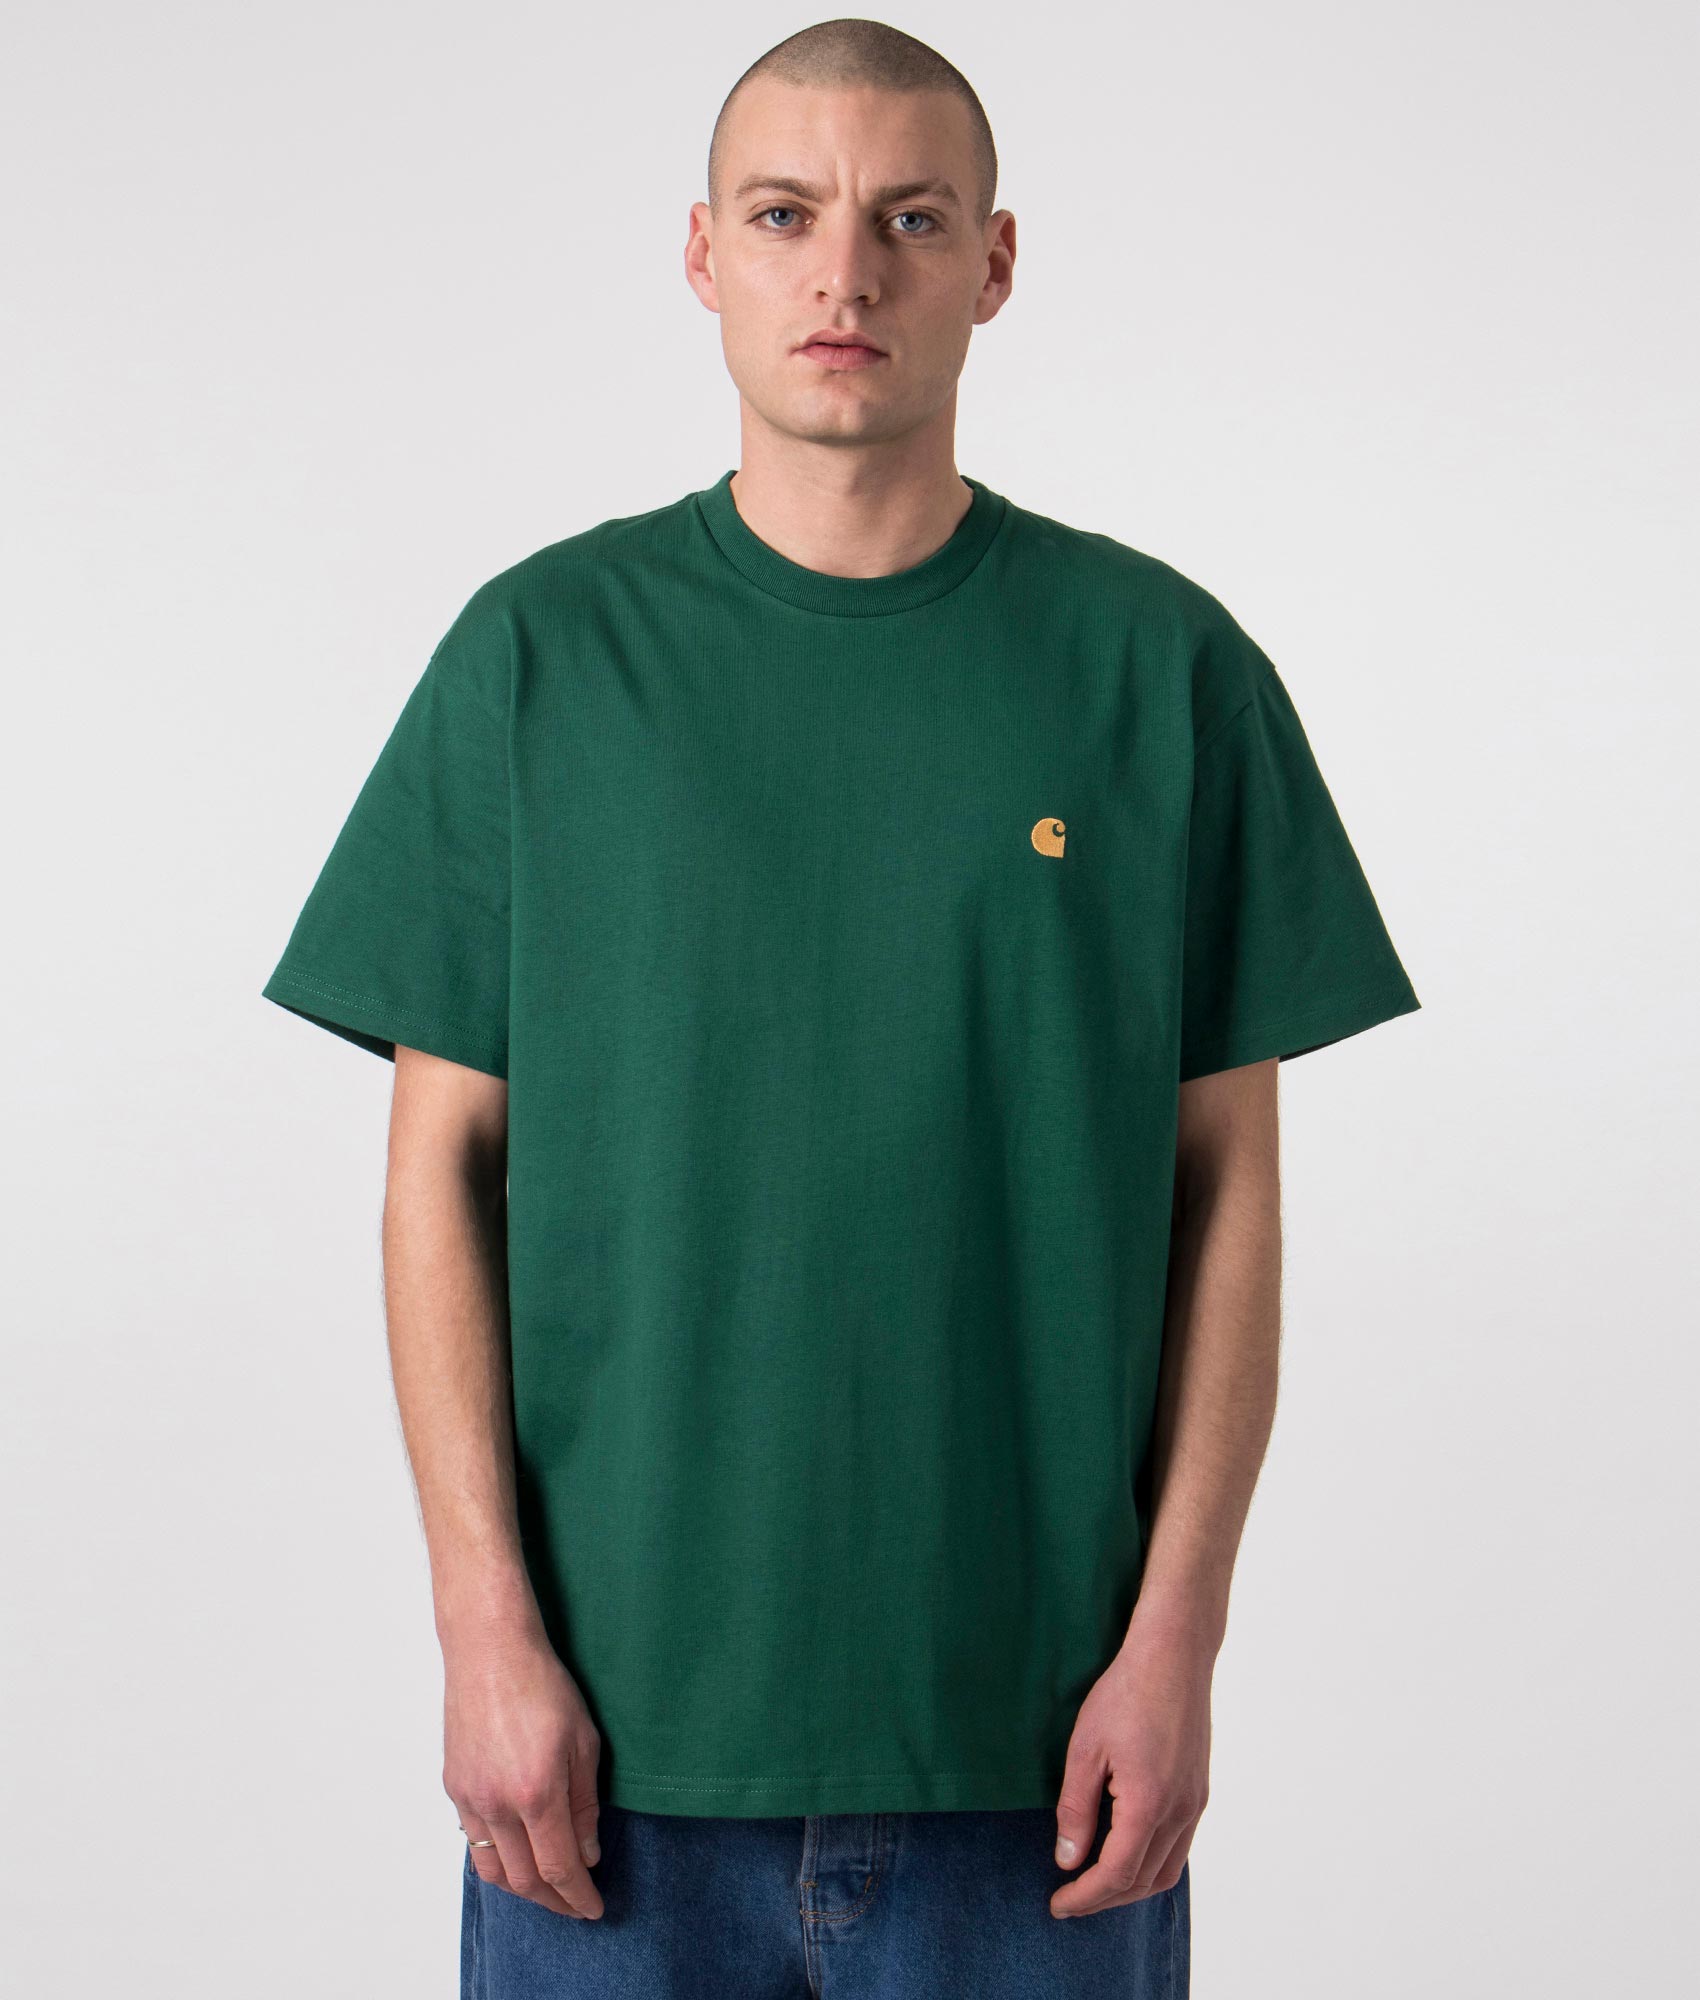 Carhartt WIP Mens Relaxed Fit Chase T-Shirt - Colour: 1YWXX Chervil/Gold - Size: XL